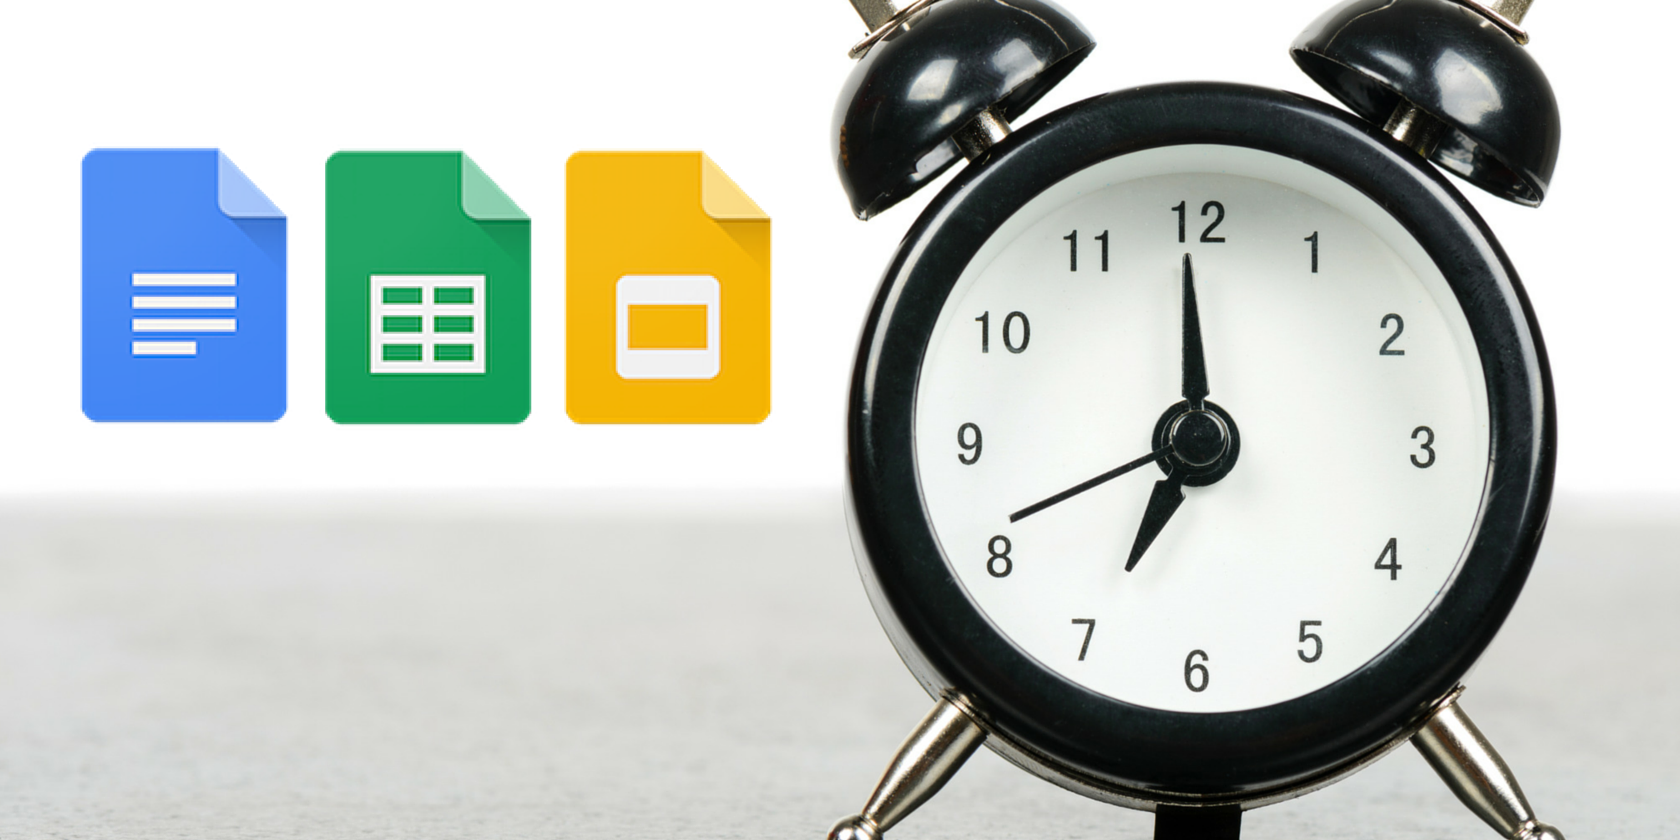 how to make a picture bigger on google docs